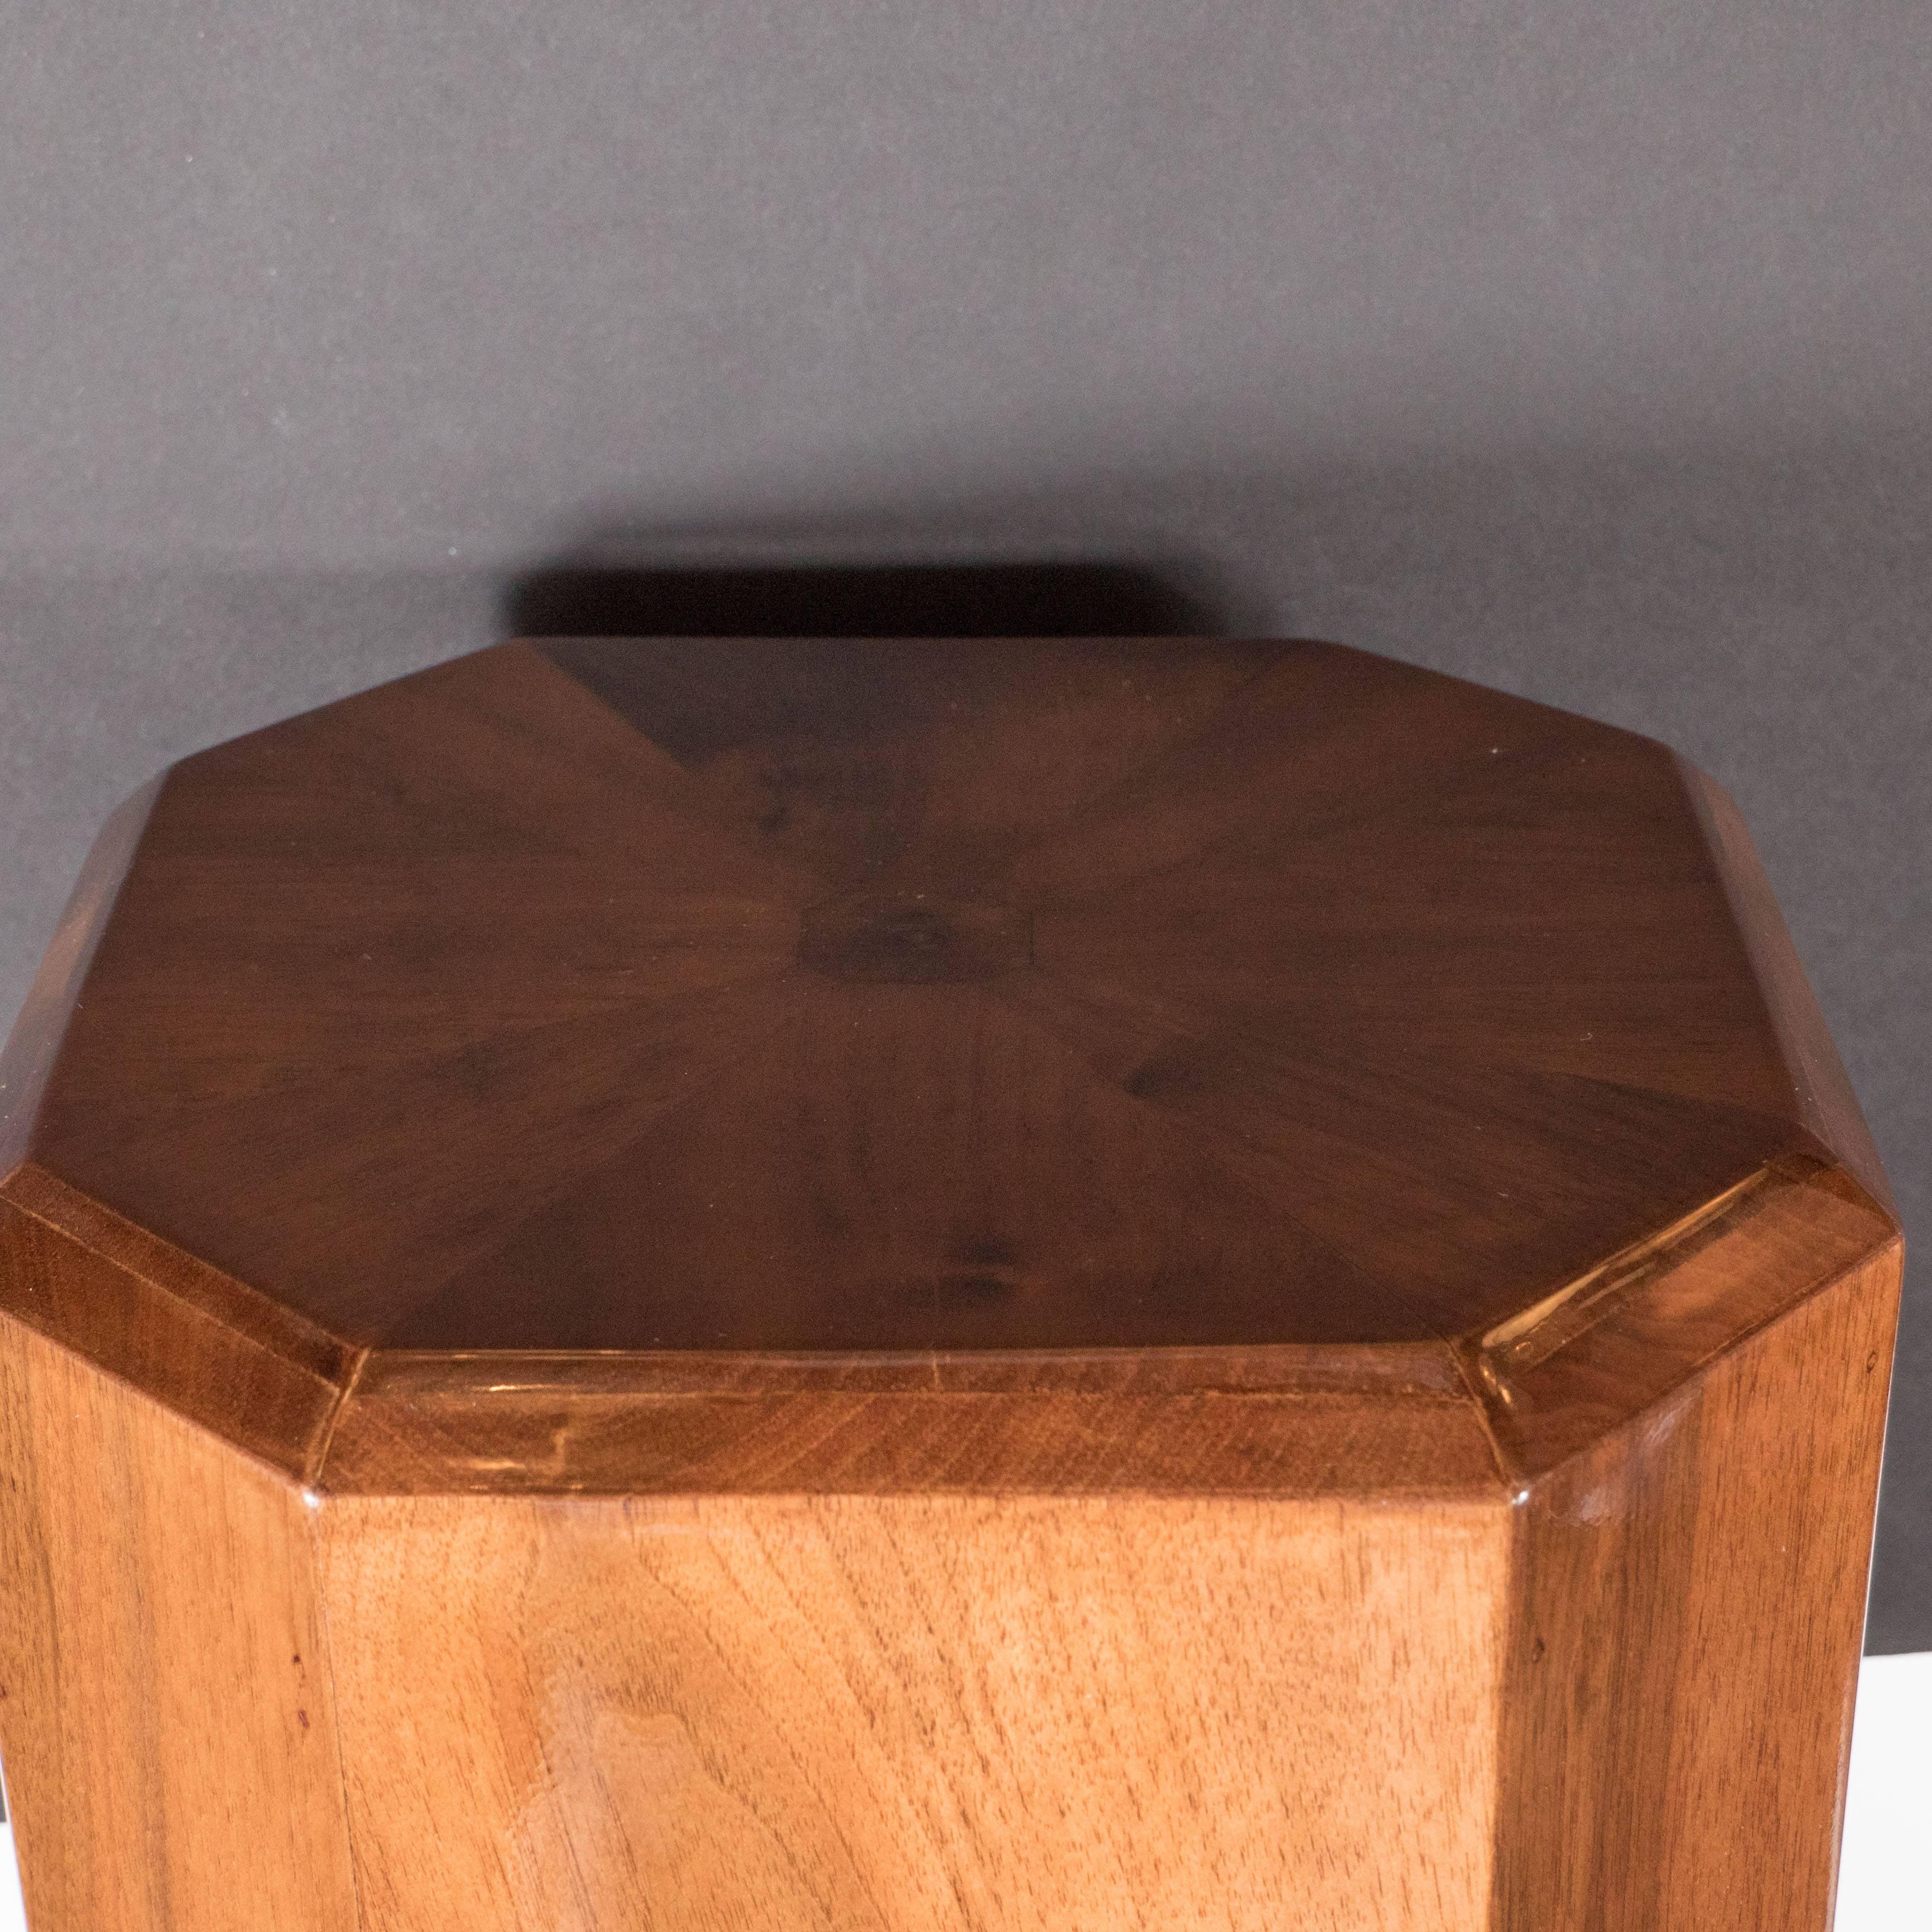 Art Deco Skyscraper-Style Pedestal in Bookmatched Walnut with Lacquer Accents 3